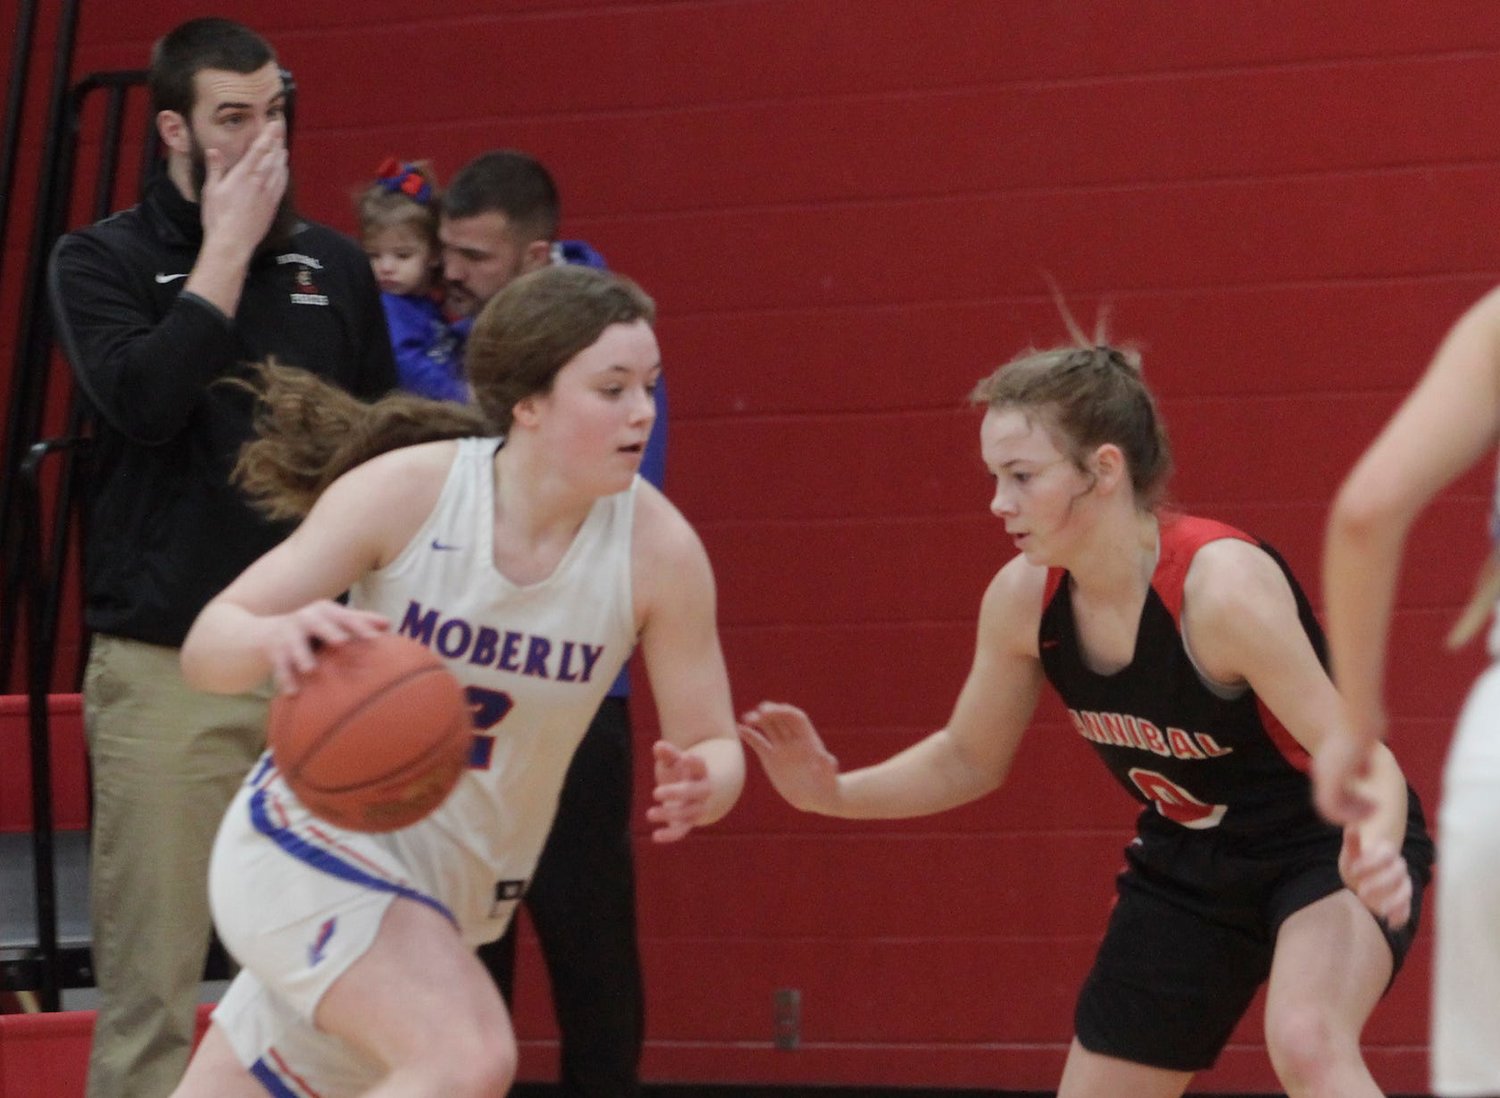 Moberly freshman Grace Billington (with ball) and the Lady Spartans basketball team had their 2020-21 season come to an end Monday with a 58-33 loss to Mexico in a semifinal game of the Class 5 District 15 tournament. Billington scored six points.